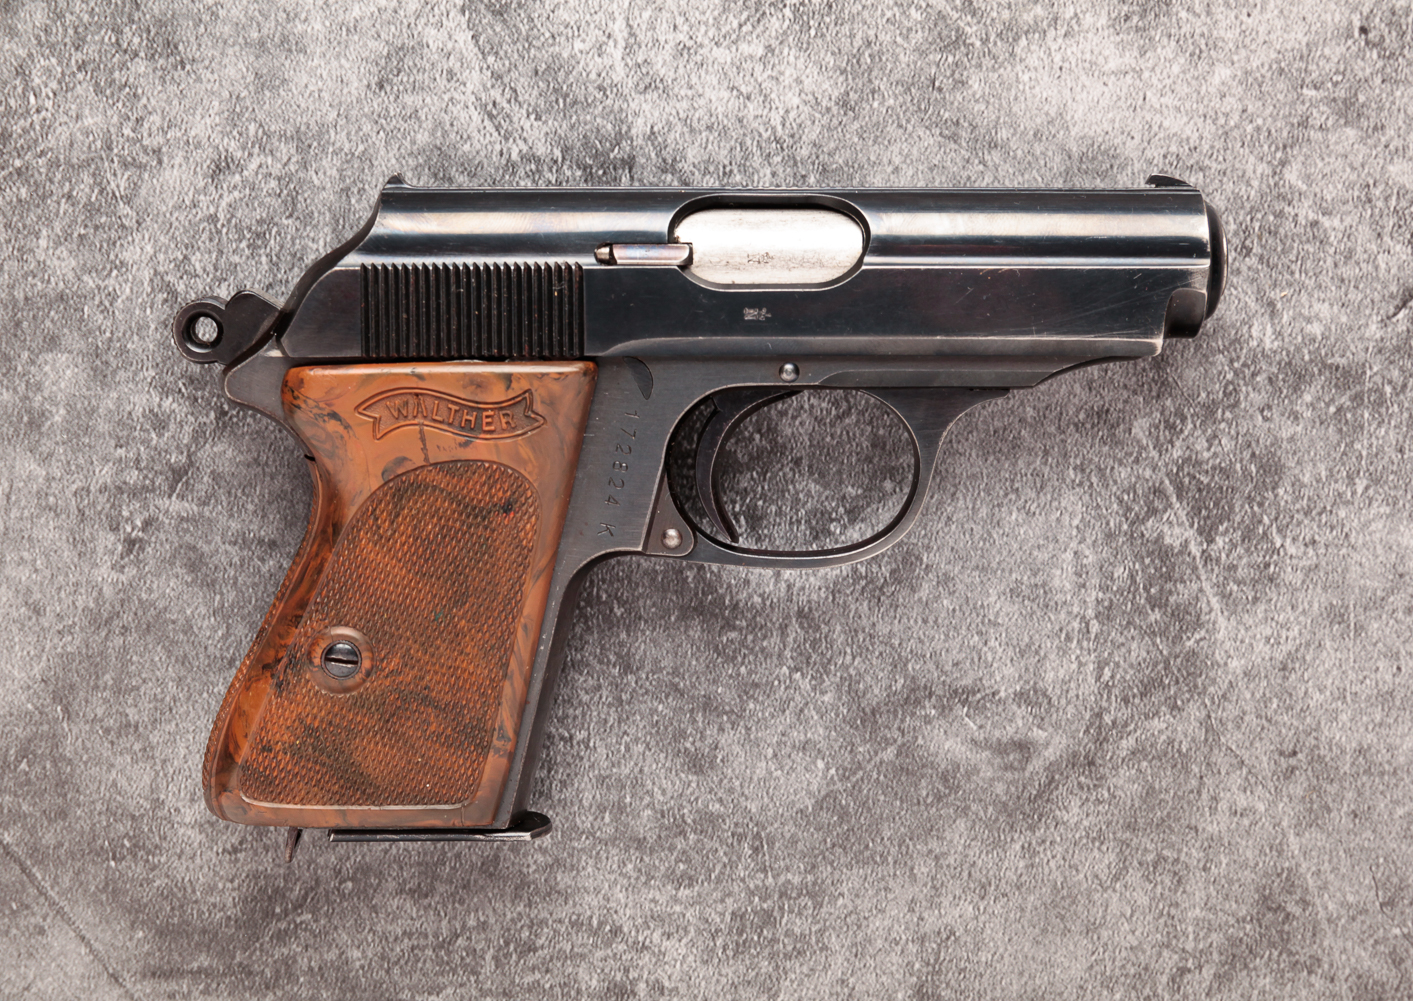 WALTHER PPK 7.65MM SEMI AUTOMATIC PISTOL